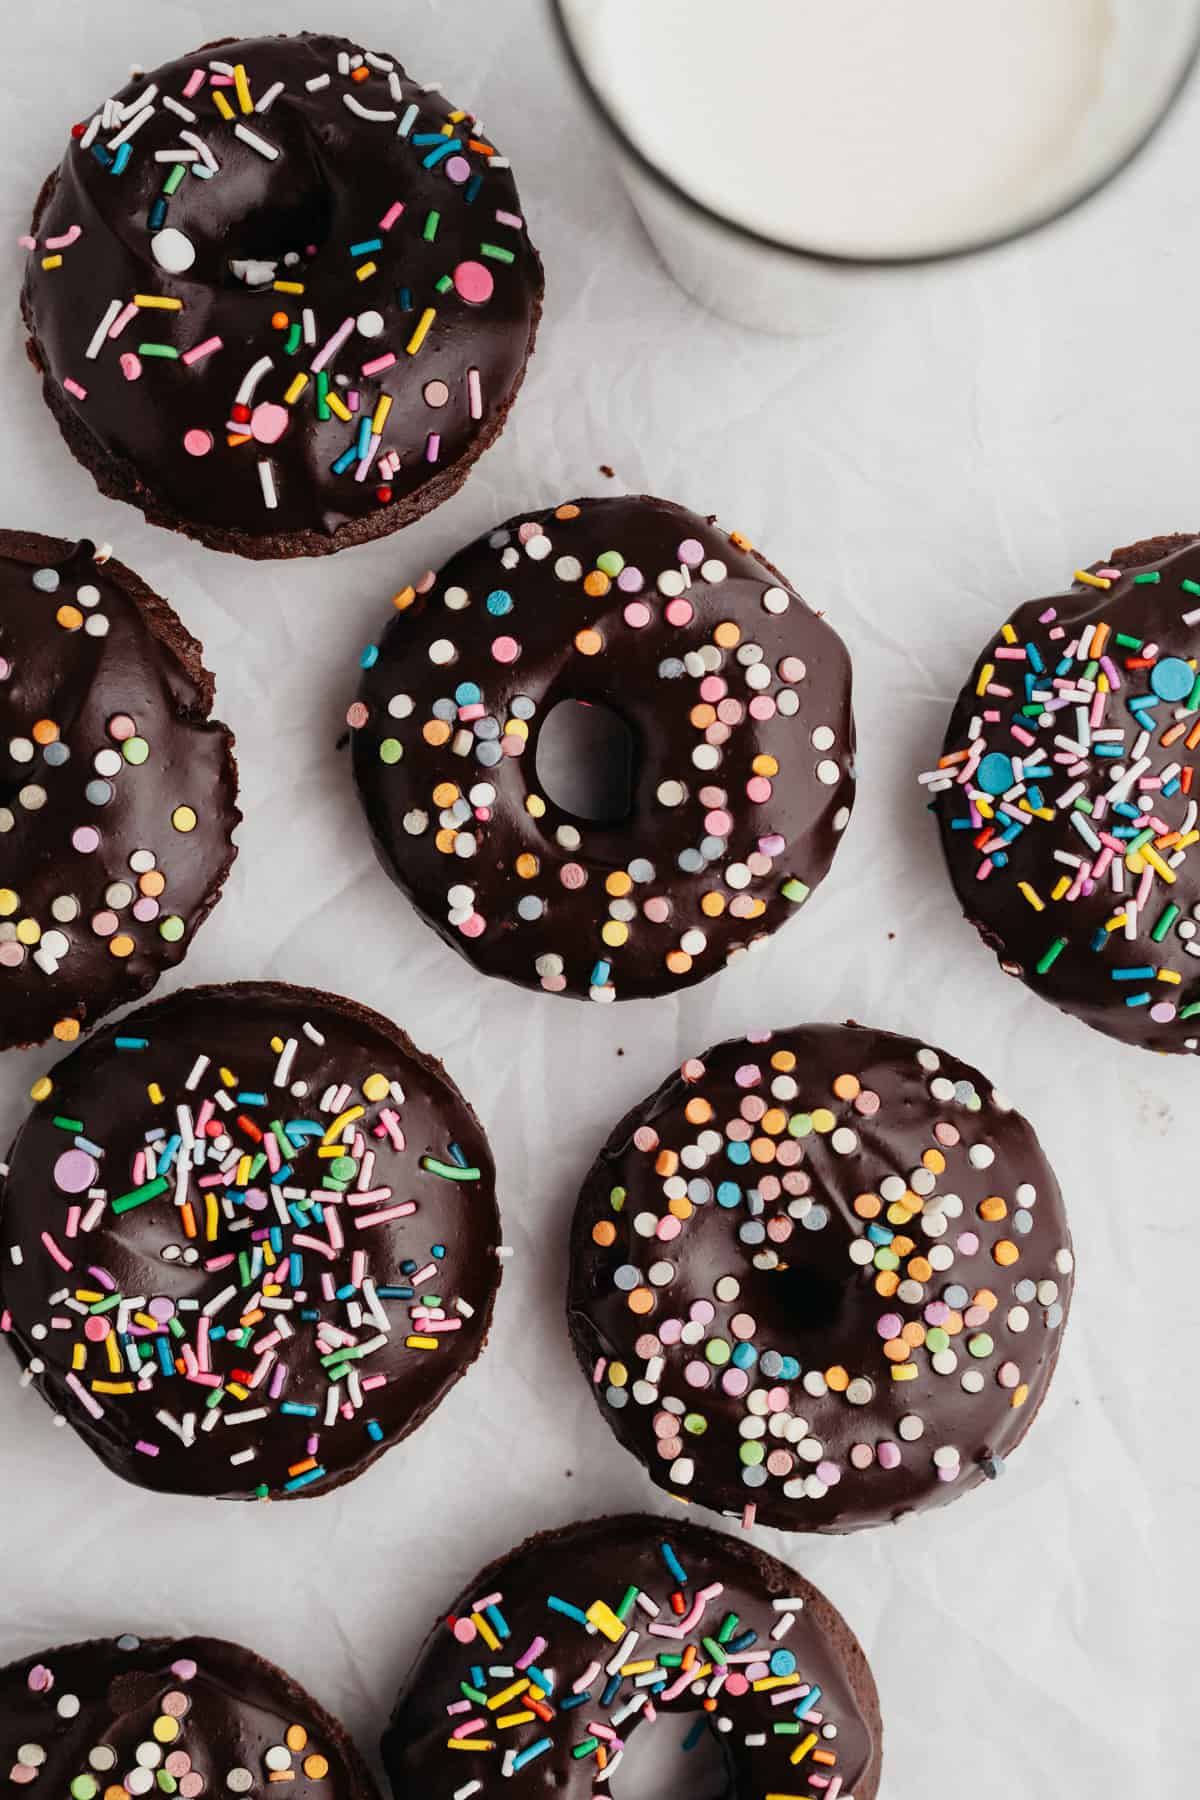 chocolate doughnuts with chocolate glaze and sprinkles on parchment paper.